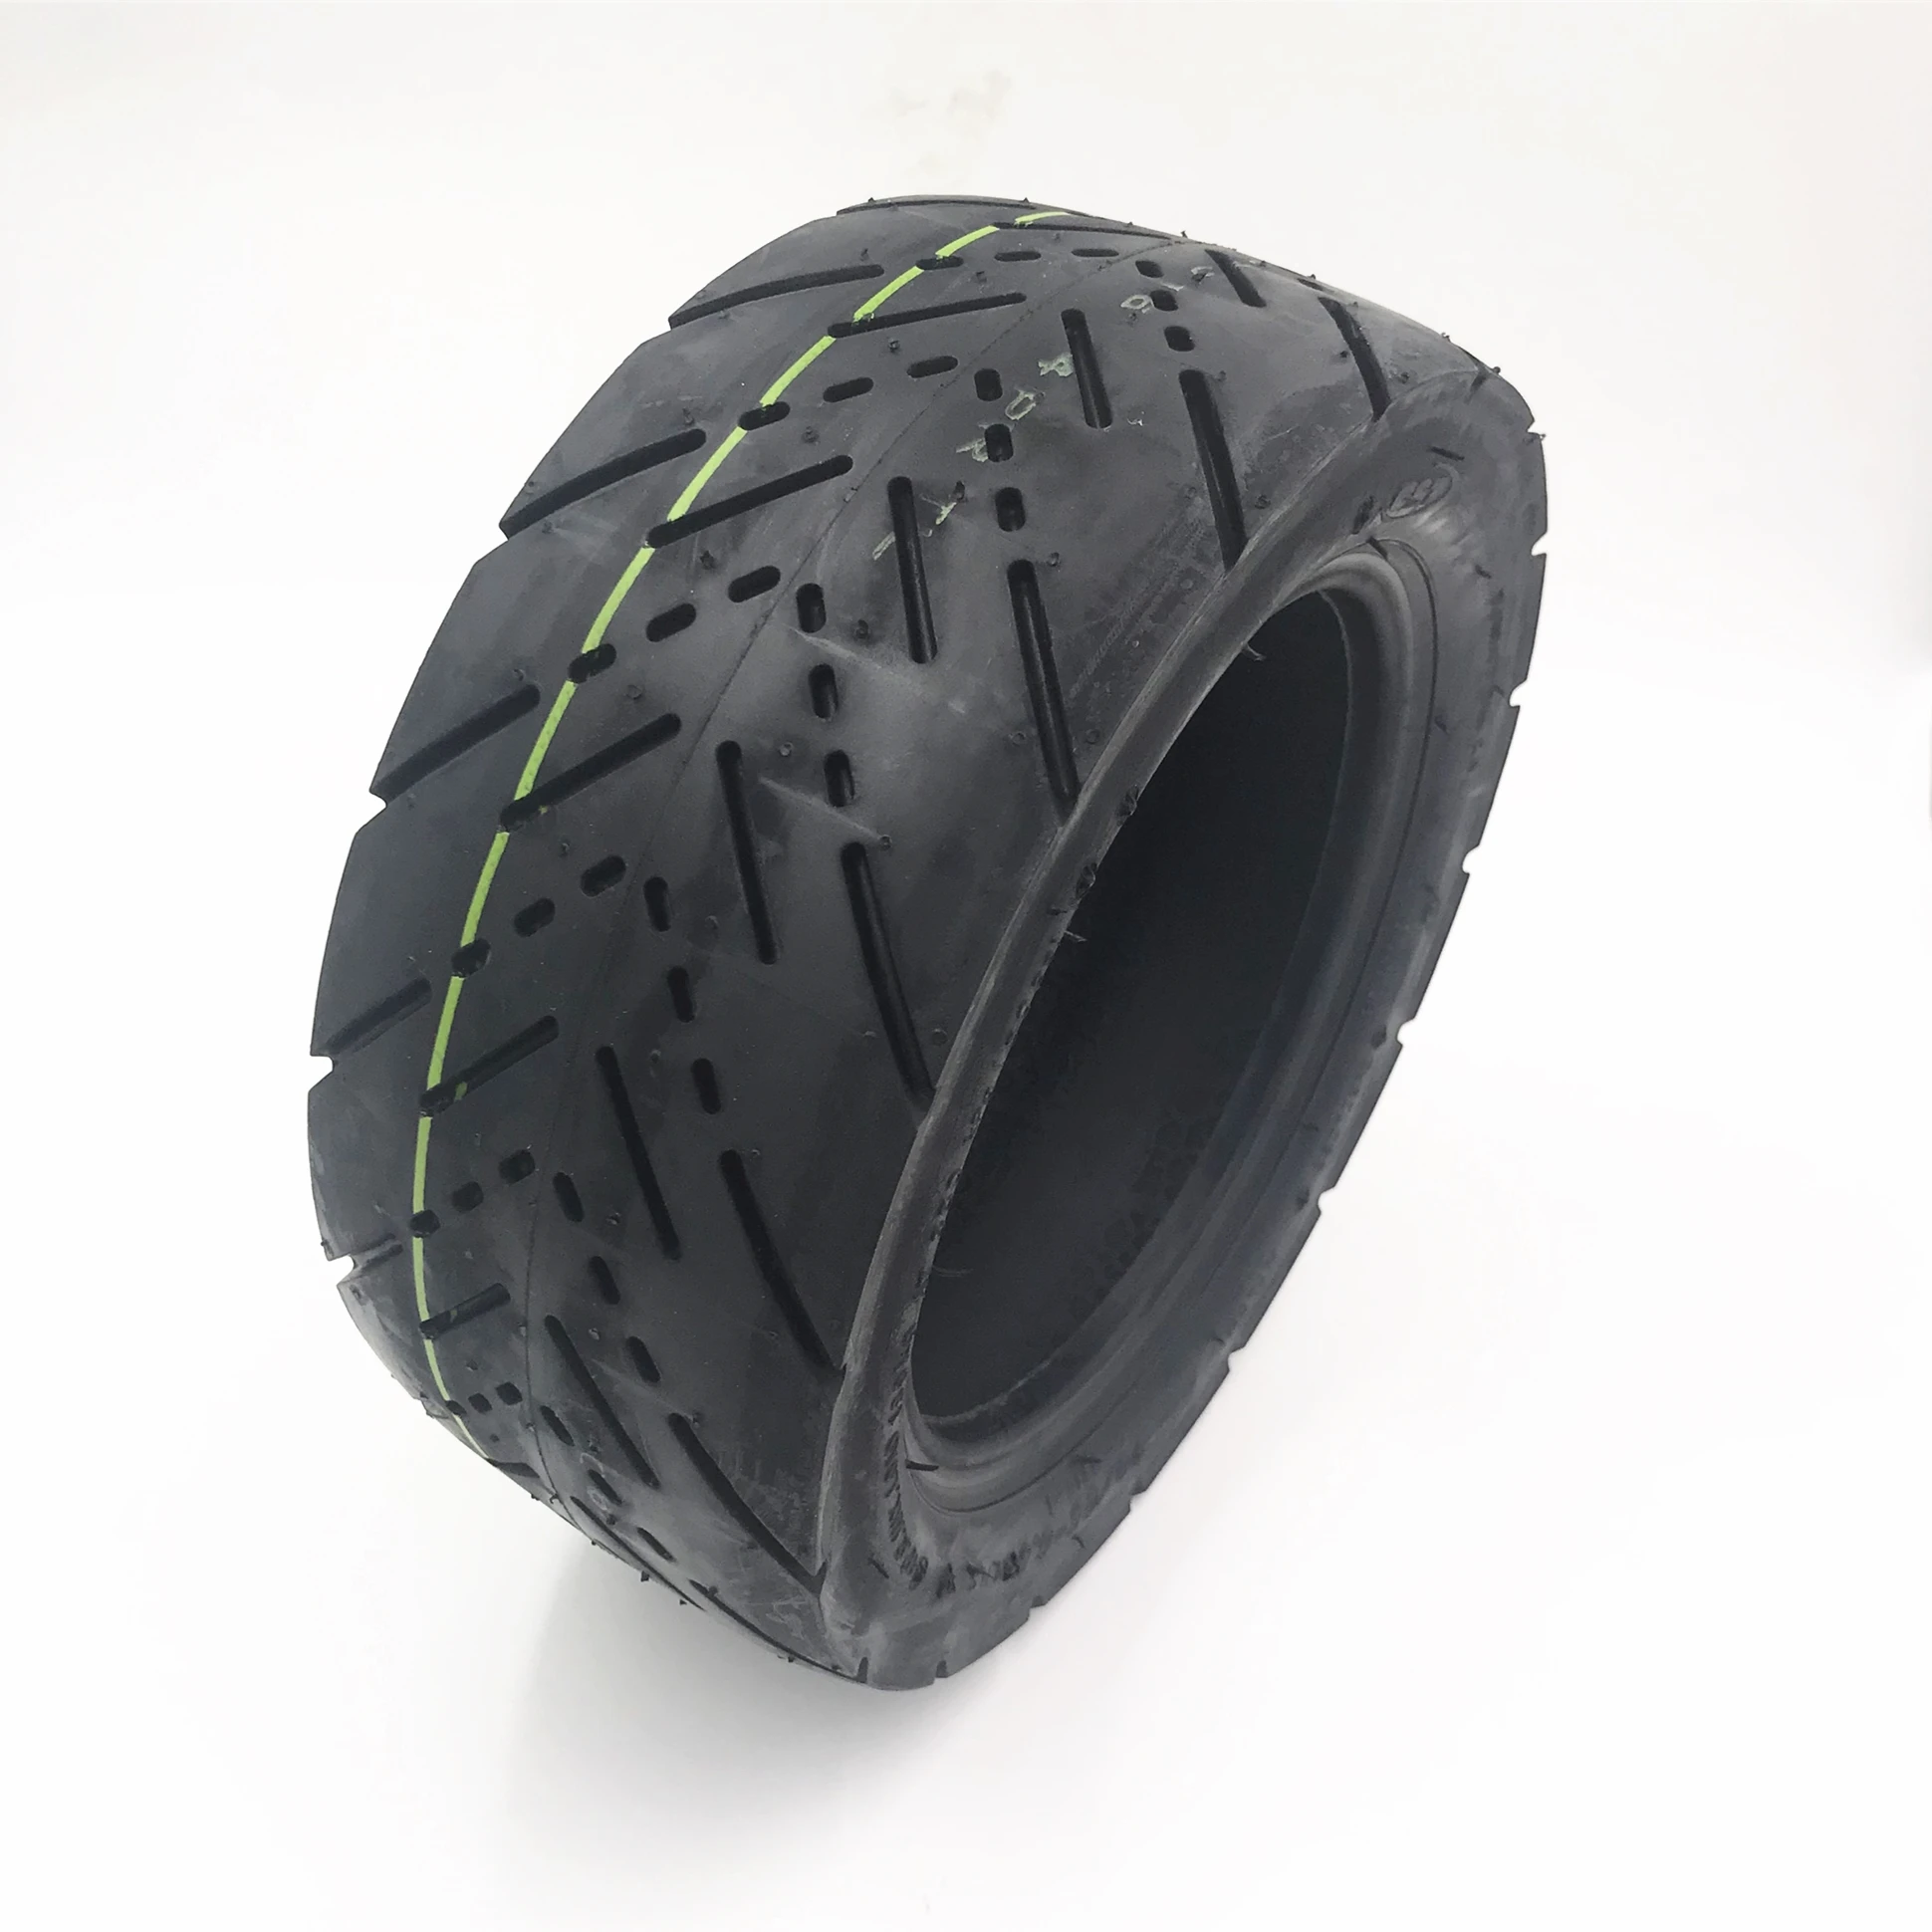 High Quality Scooter Tubless Tyre Cst On Road Tire 90 65 6 5 About 10 Inch Buy Mini 10 Inch Tyres Scooter Tubelss Tyre Cst 90 65 6 5 Tire Product On Alibaba Com